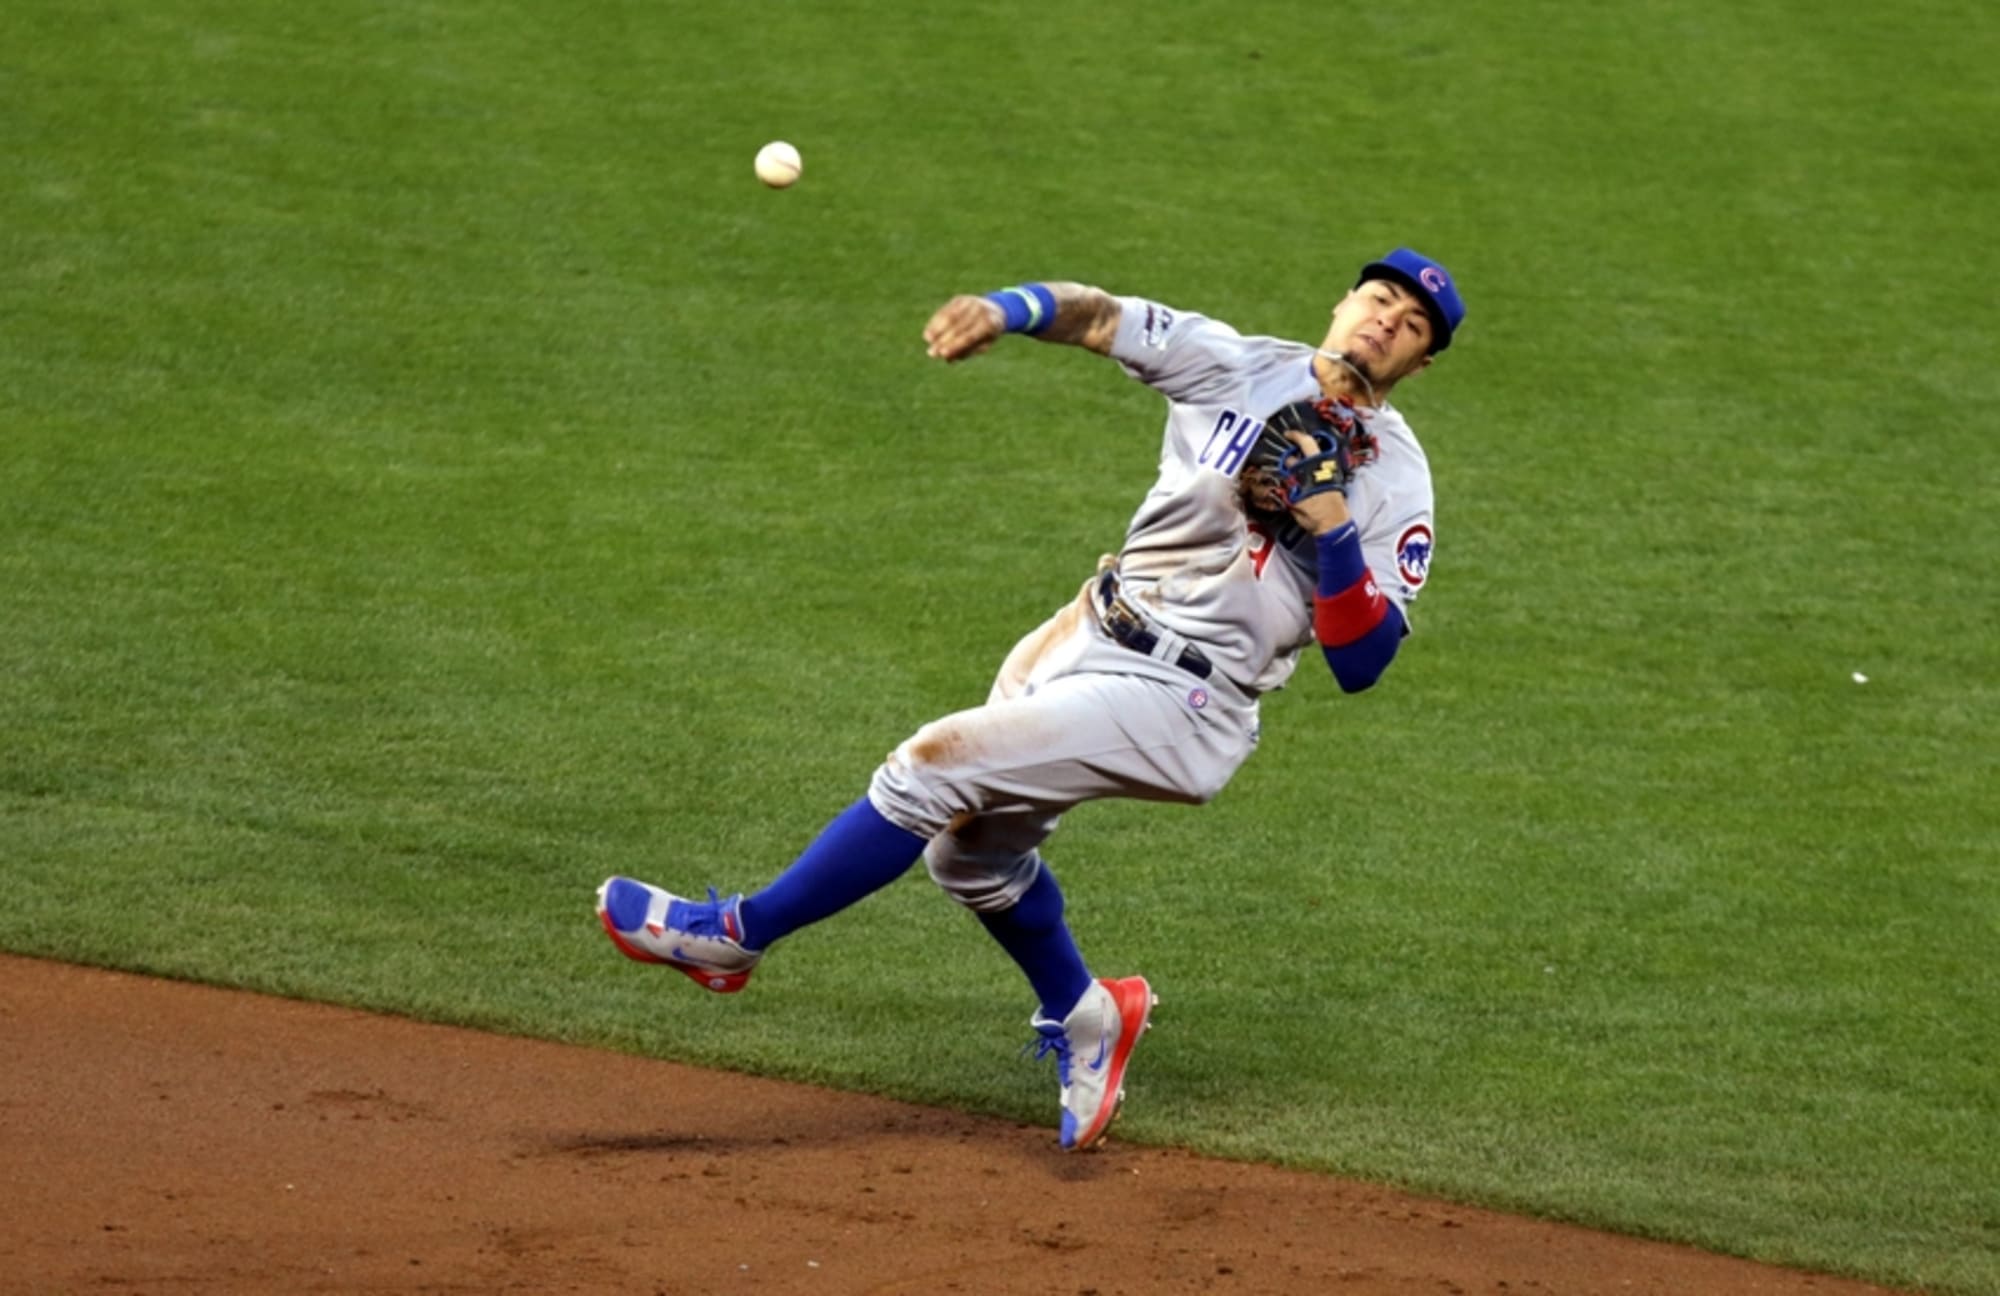 Javier Baez putting on show for Cubs on playoff stage